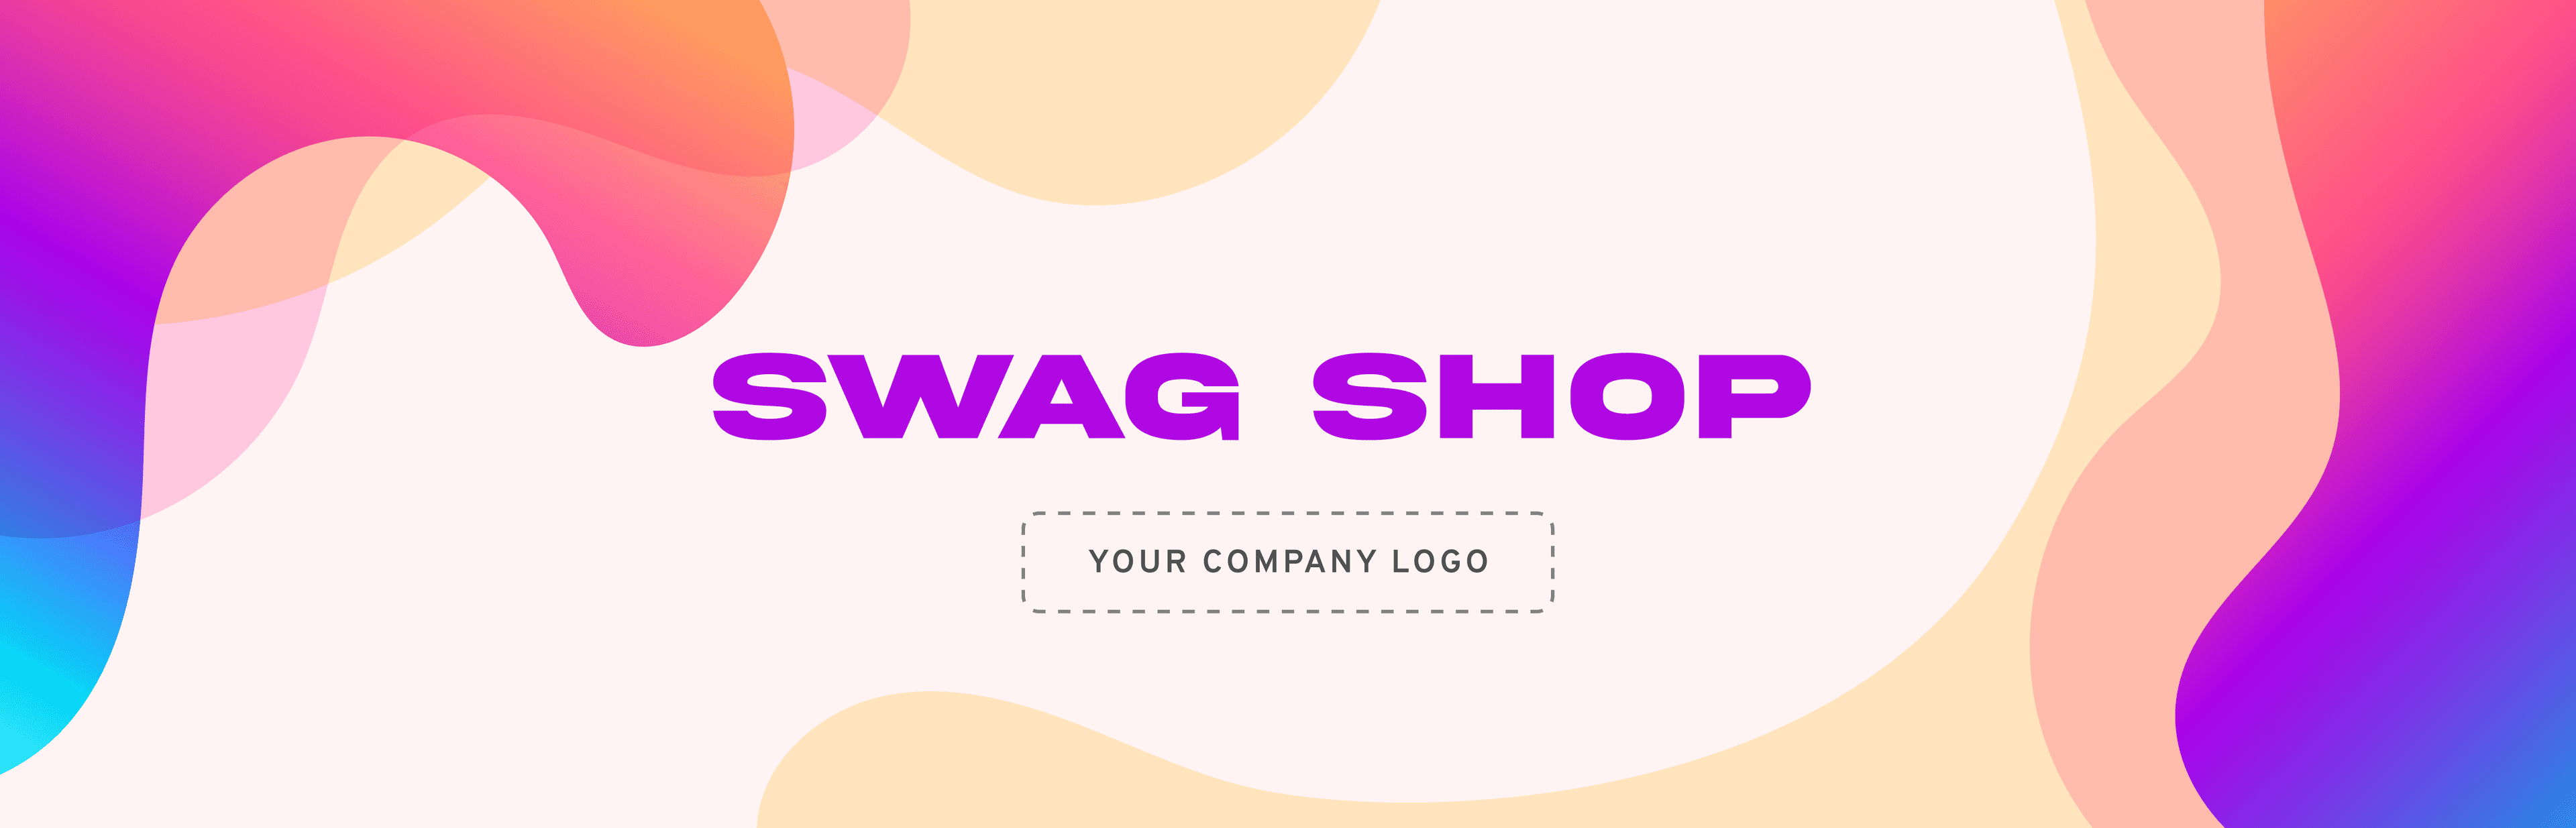 Popular Print-On-Demand Store for Swag Shop